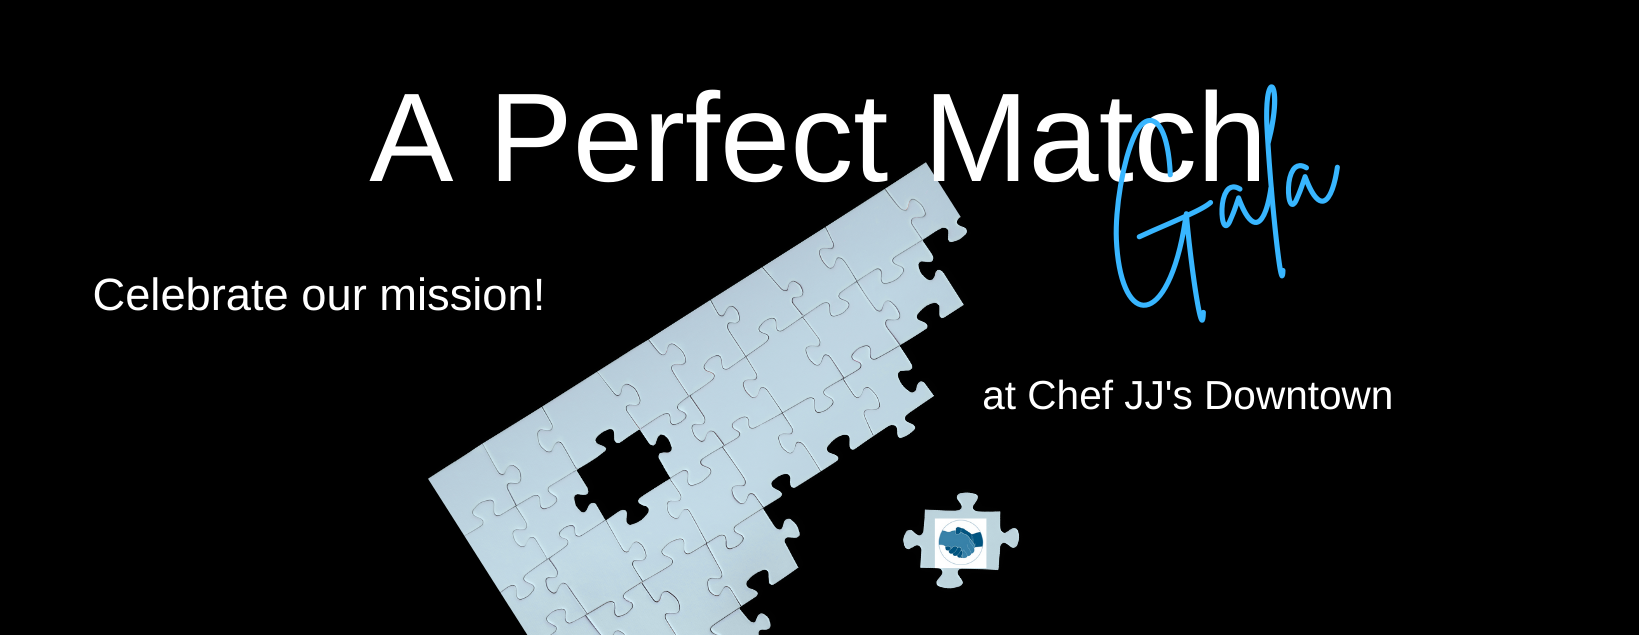 A Perfect Match Gala for Trusted Mentors